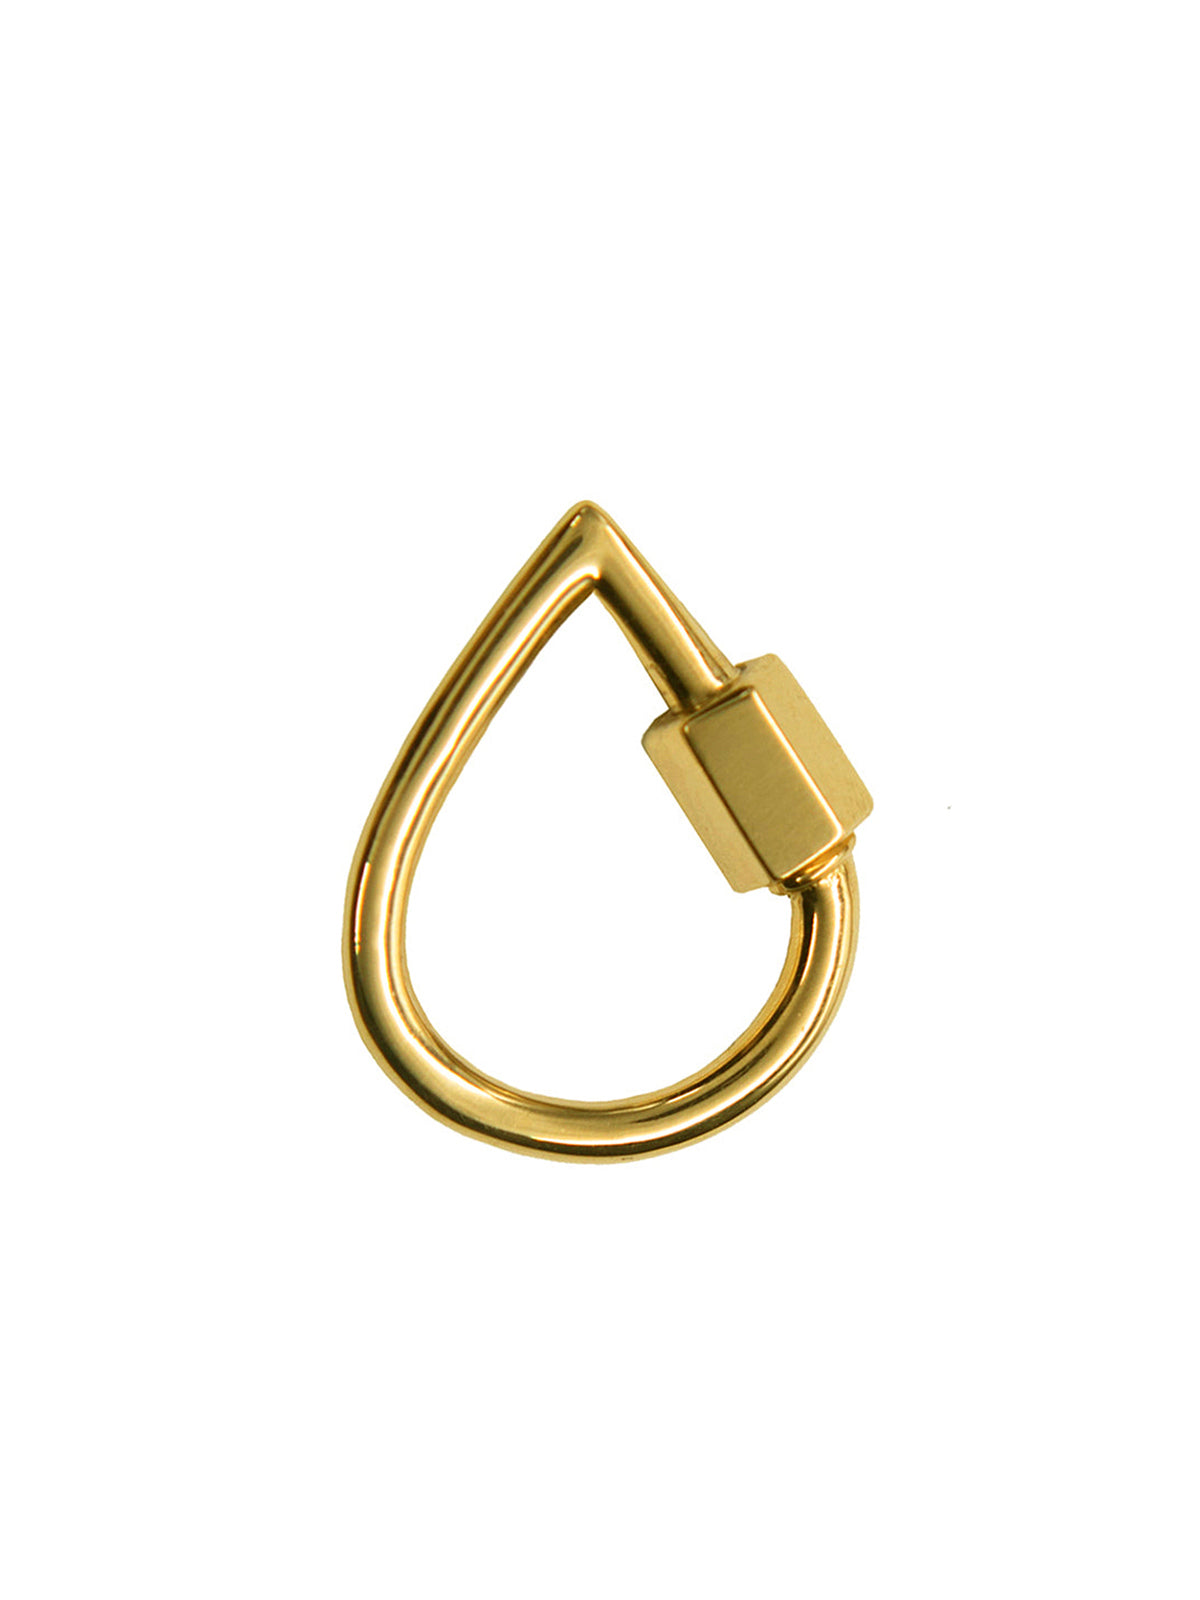 Exclamation Point Lock in Gold – Marla Aaron